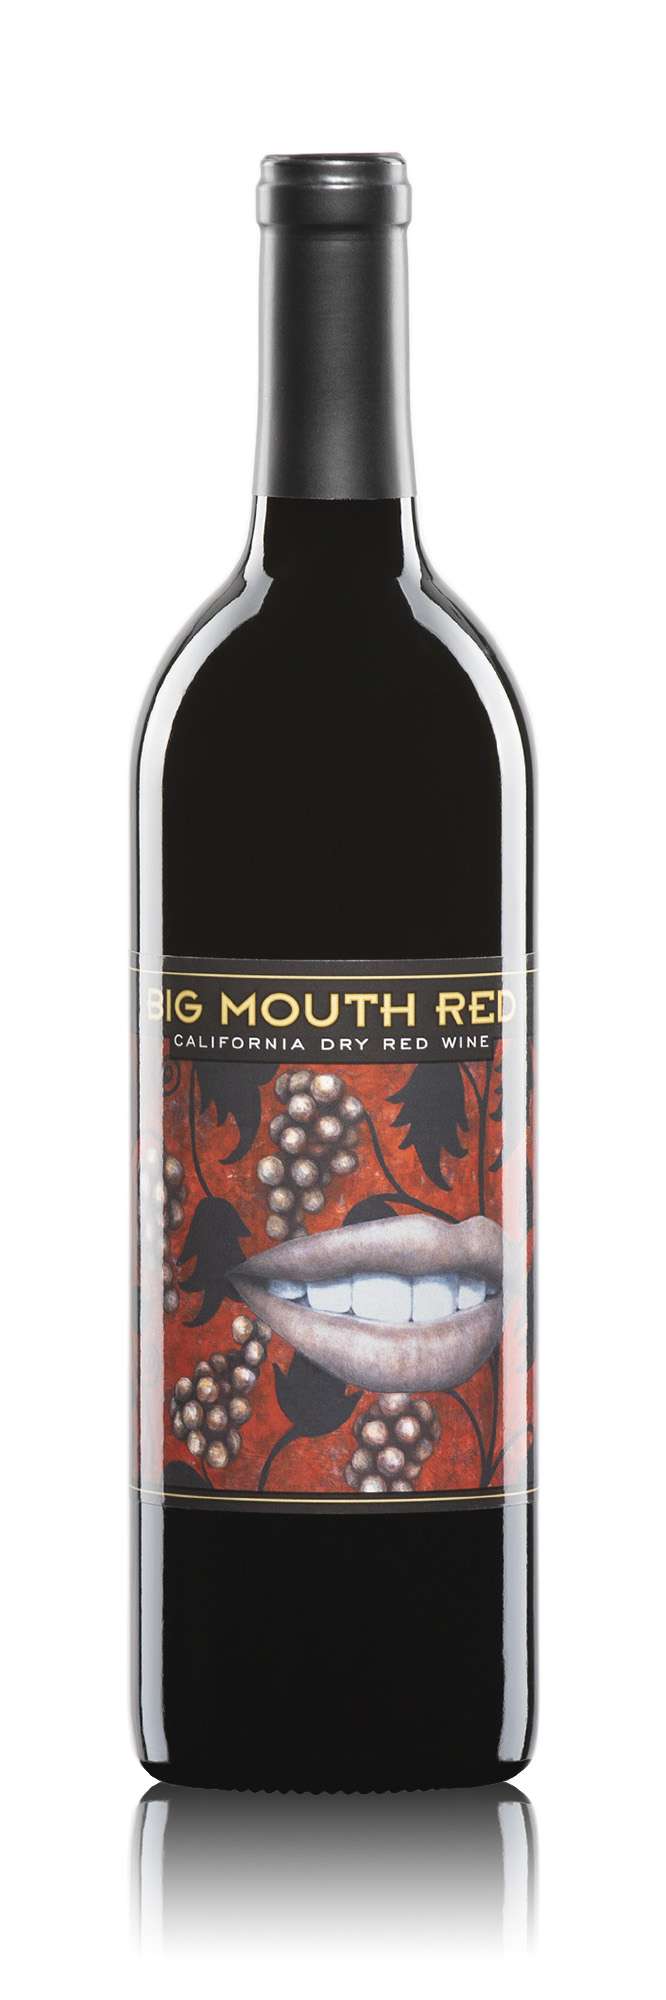 Product Image for Big Mouth Red, Lodi California